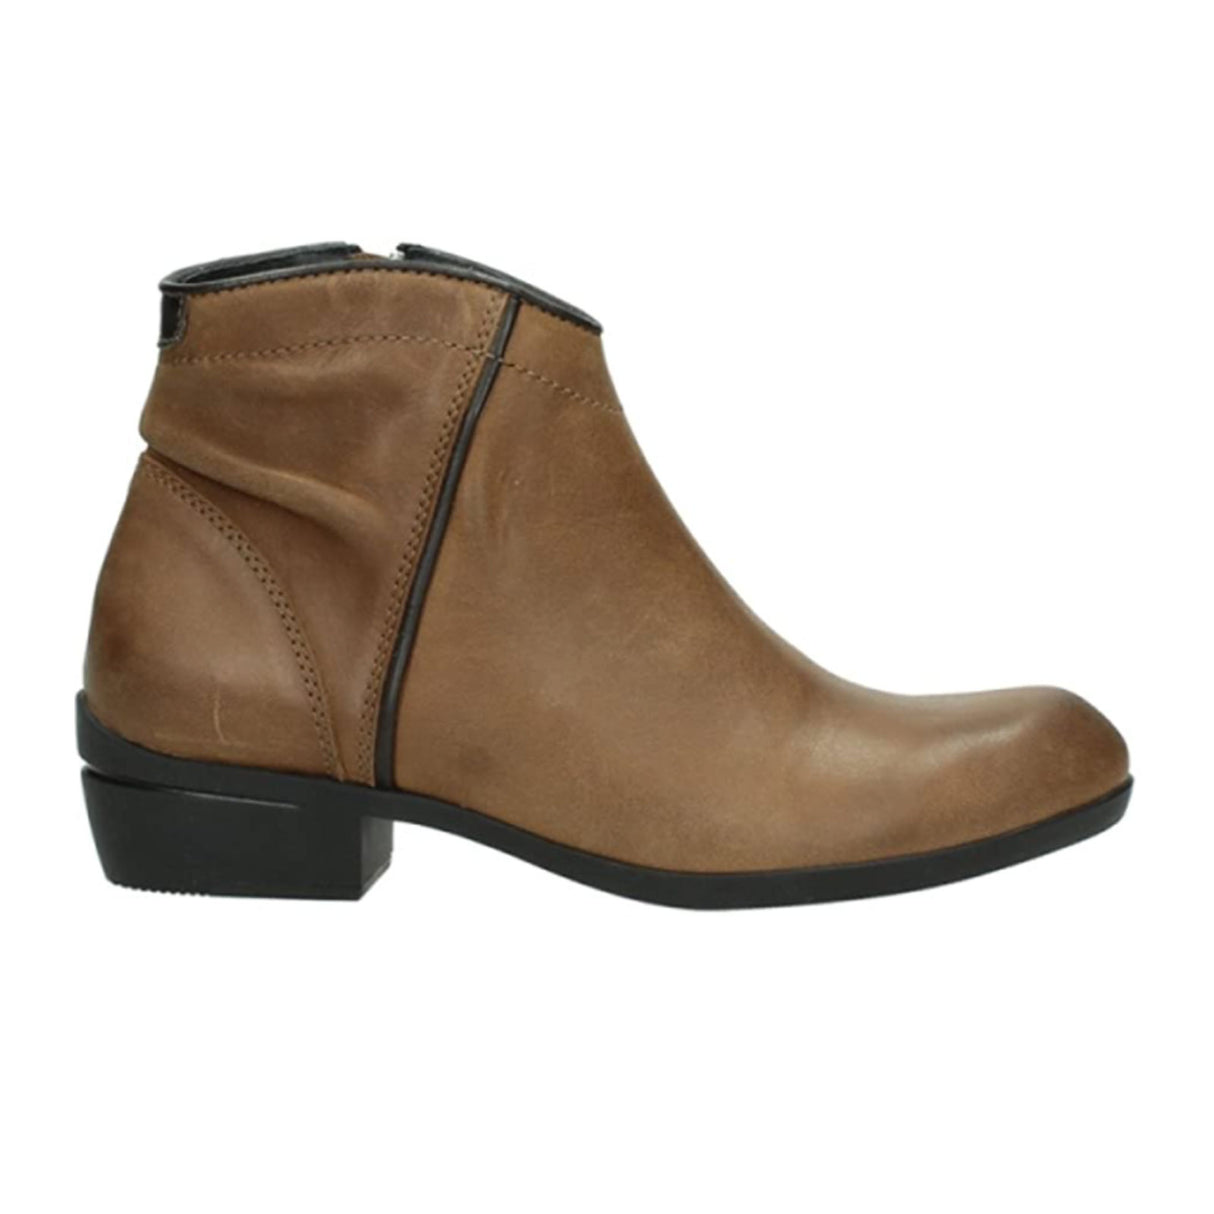 Wolky Winchester (Women) - Cognac Boots - Fashion - Ankle Boot - The Heel Shoe Fitters